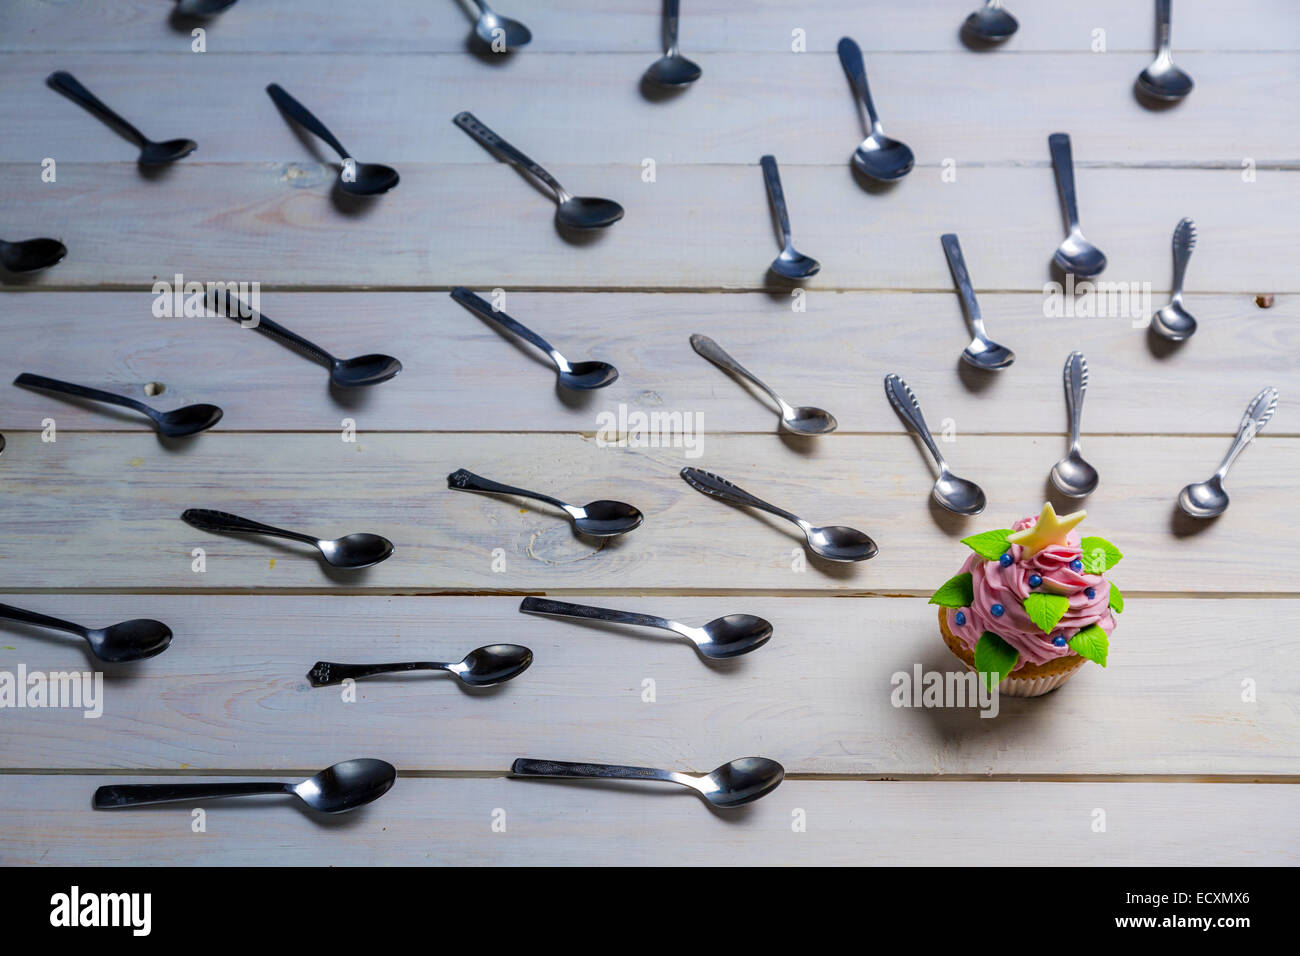 Witchhunt by teaspoon on a muffin Stock Photo